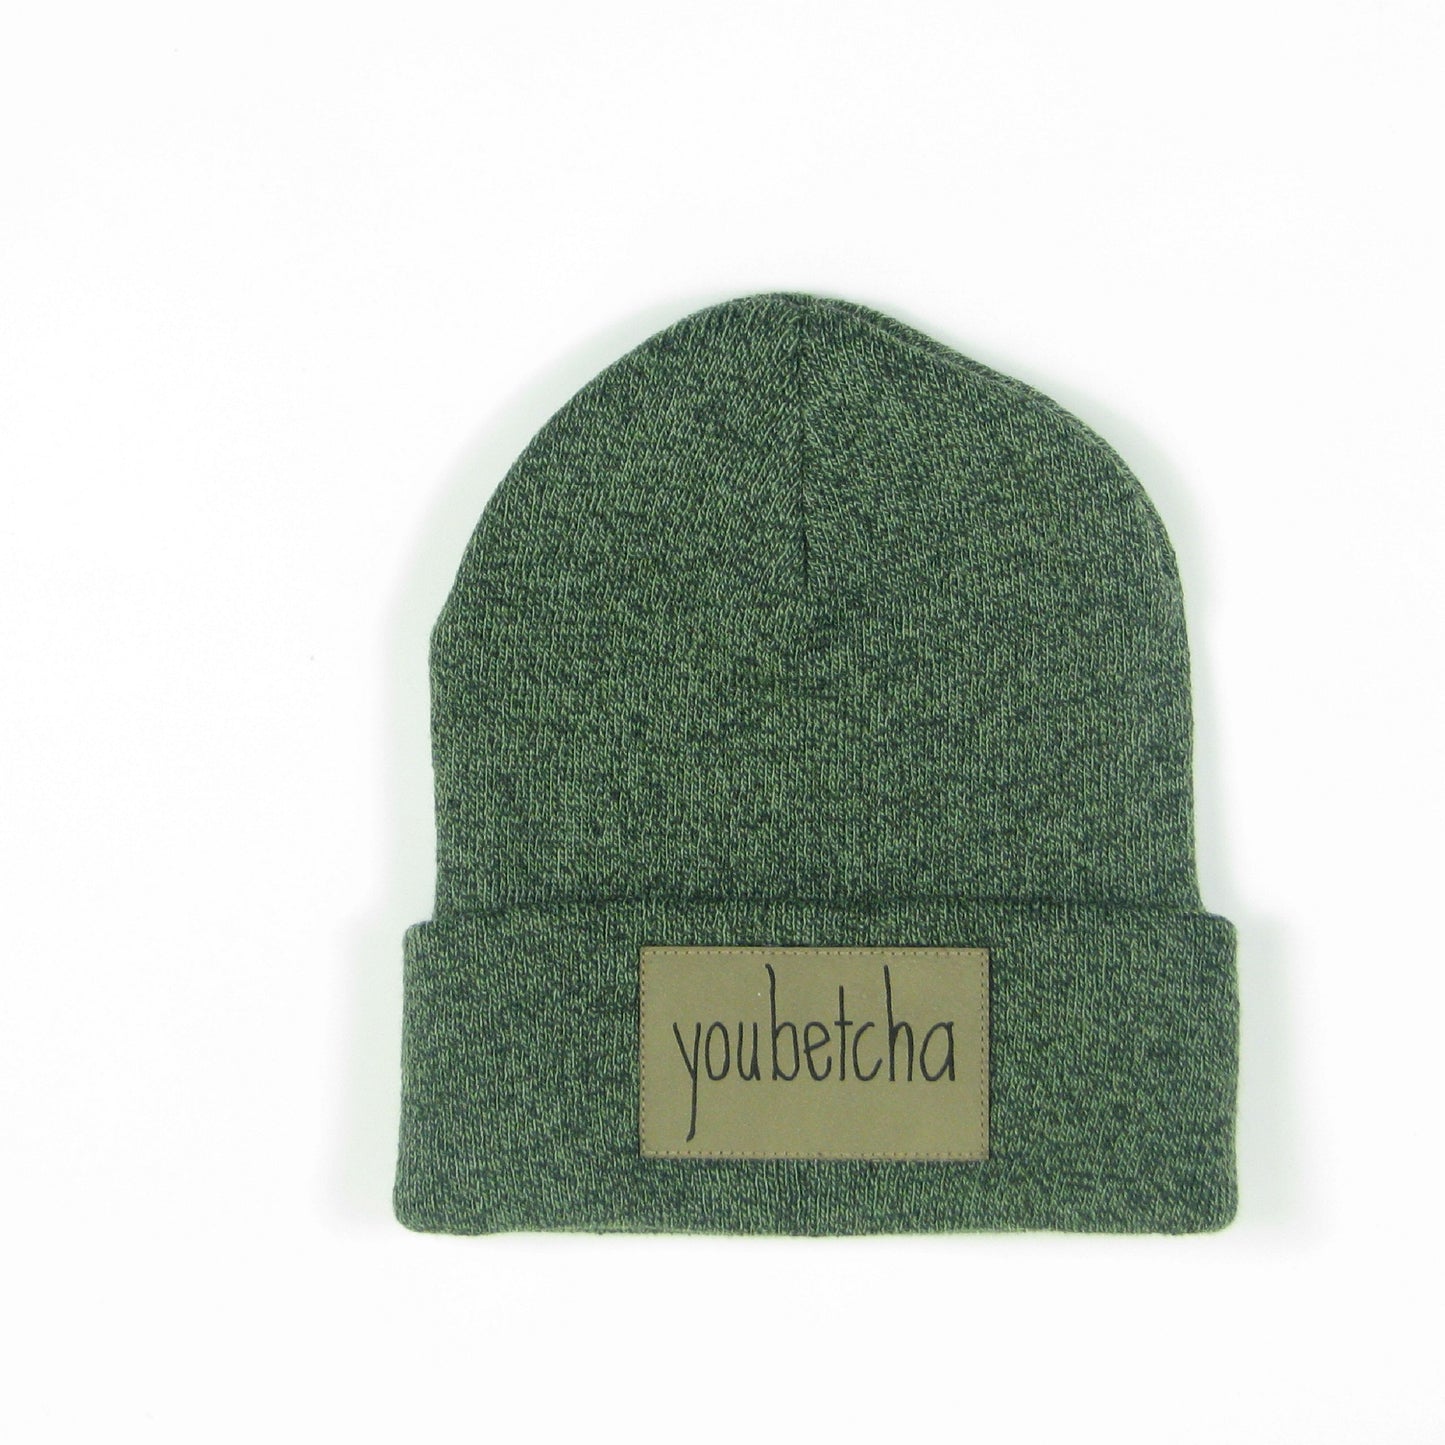 Youbetcha Cuffed Beanie in Marled Olive/Black with Leather Patch